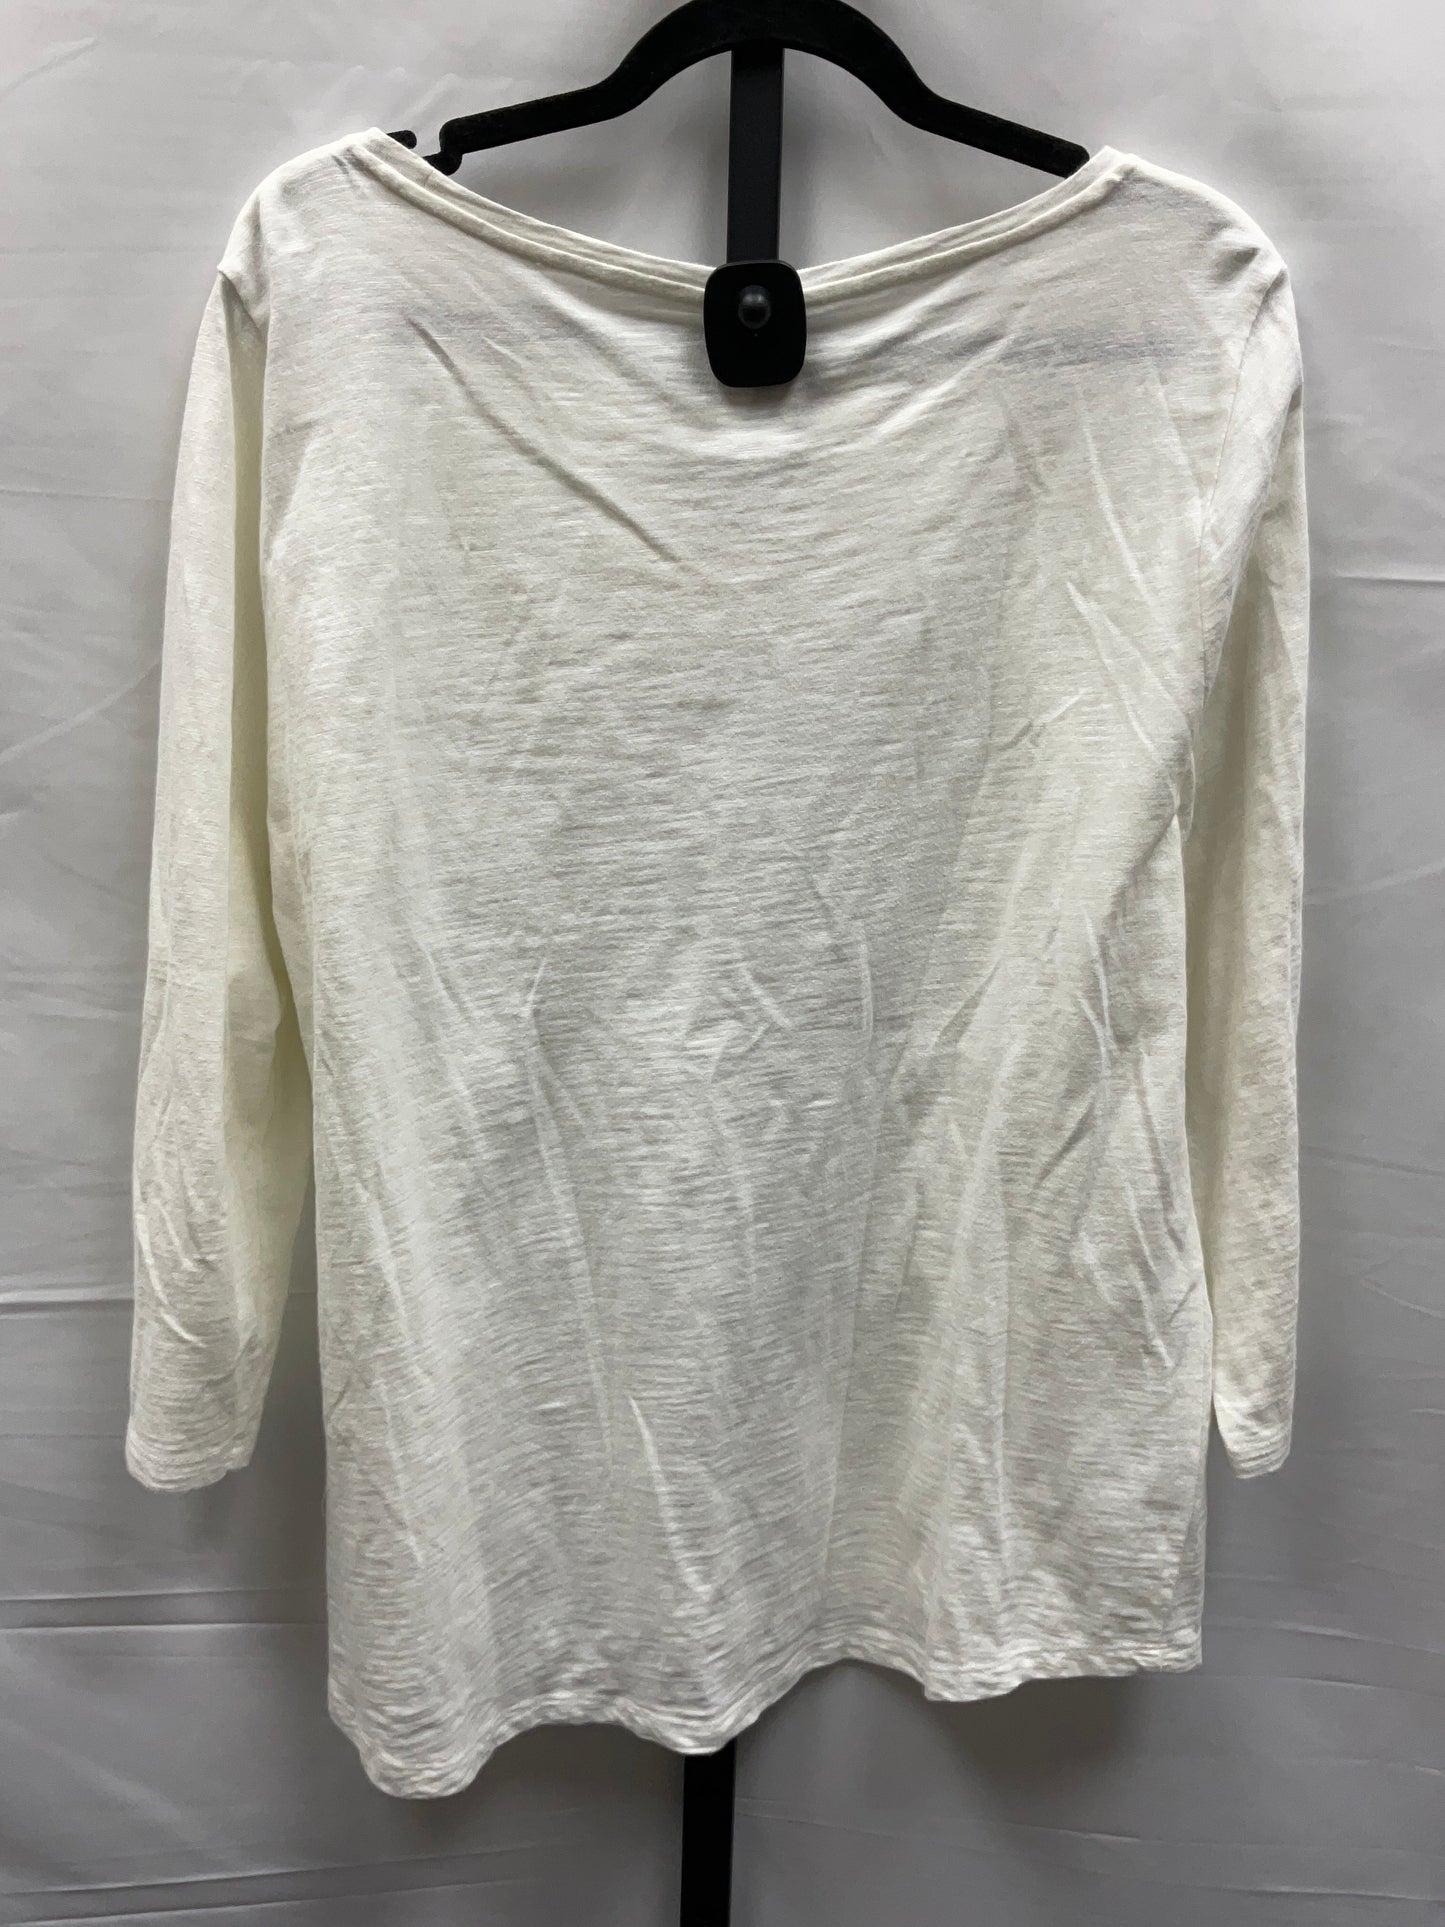 White Top Long Sleeve Talbots, Size Xl